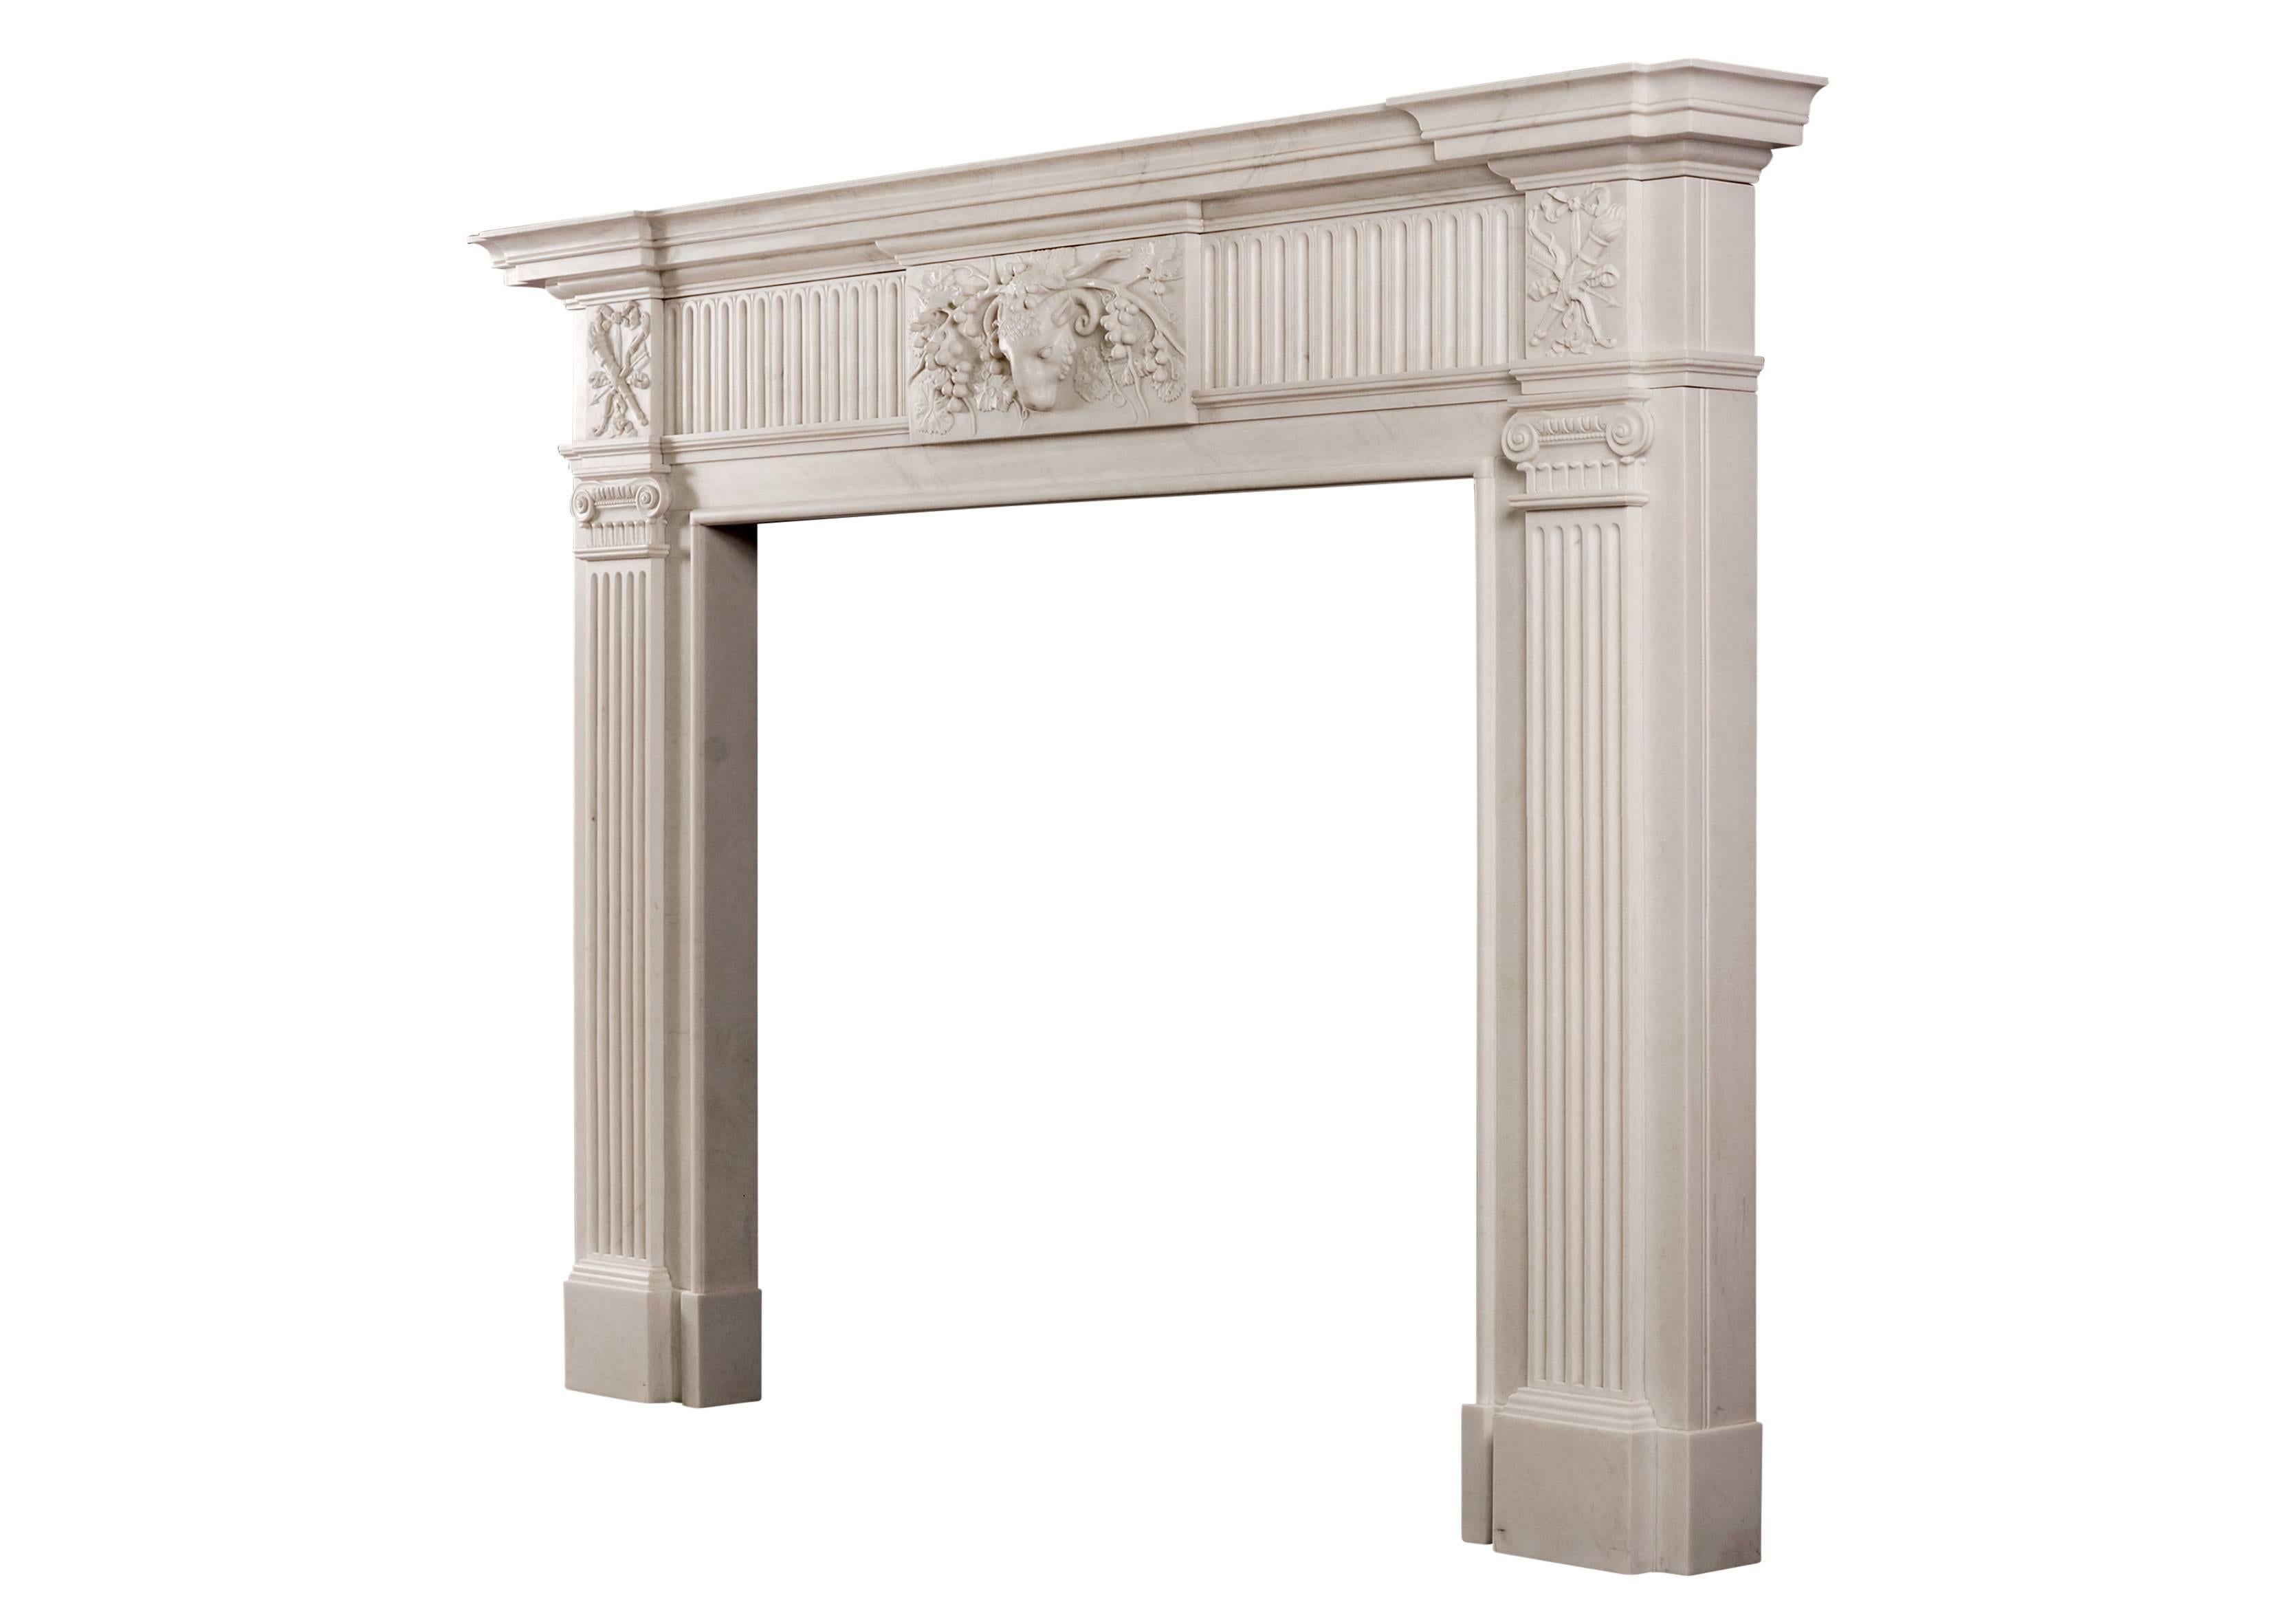 A fine quality English white marble fireplace in the manner of George III. The centre tablet with ram's head and vine leaves, juxtaposed with inlaid fluting. The fluted jambs surmounted by ionic capitals and quiver, arrow and ribbon side blocking.